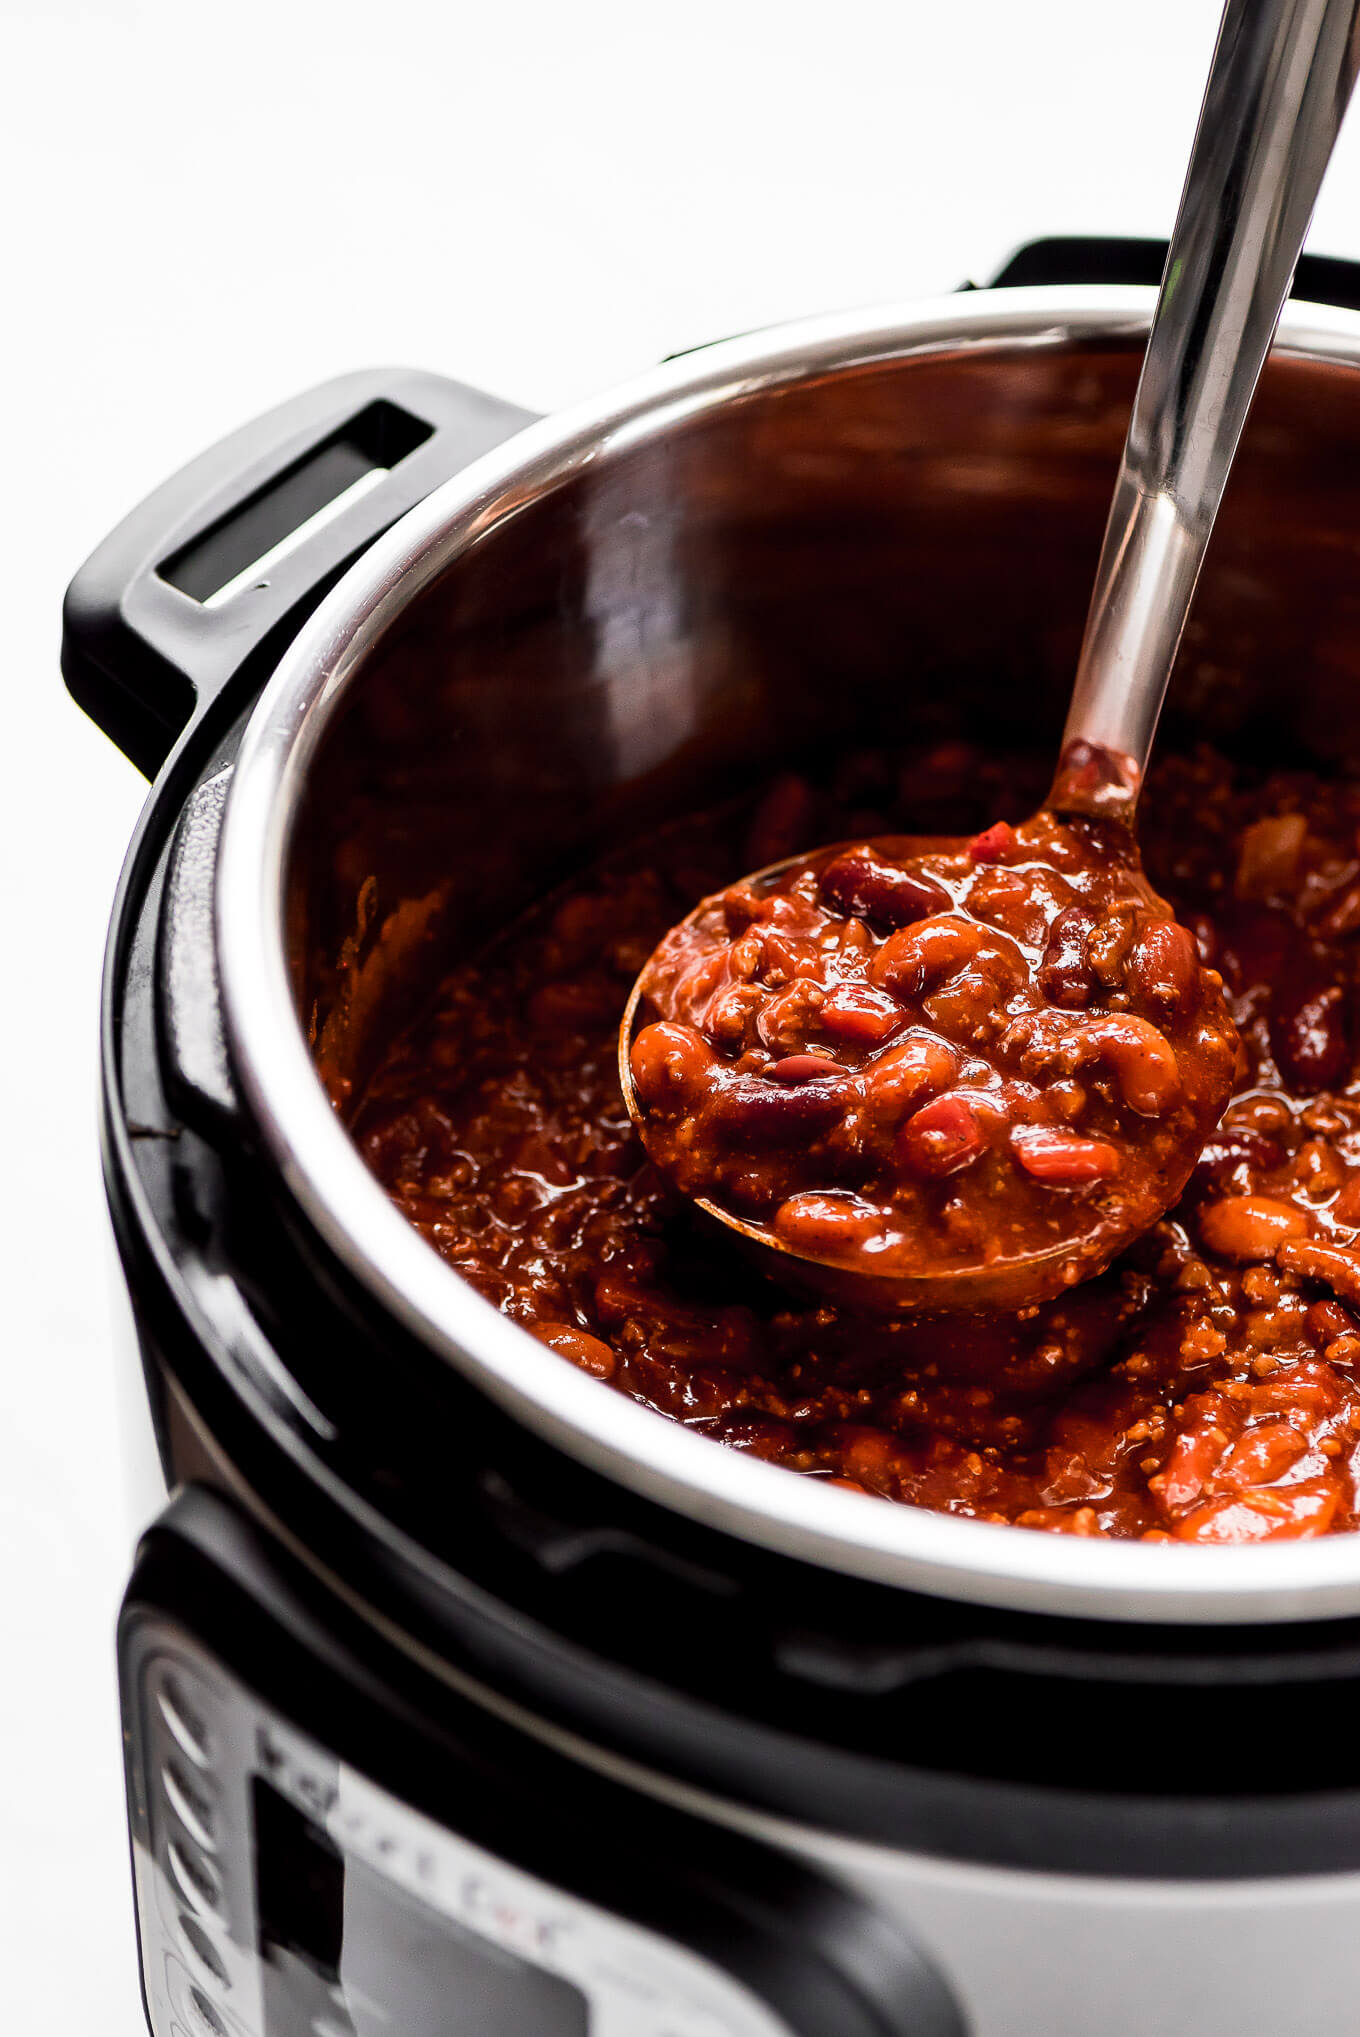 A ladle full of chili being lifted out of a pressure cooker.